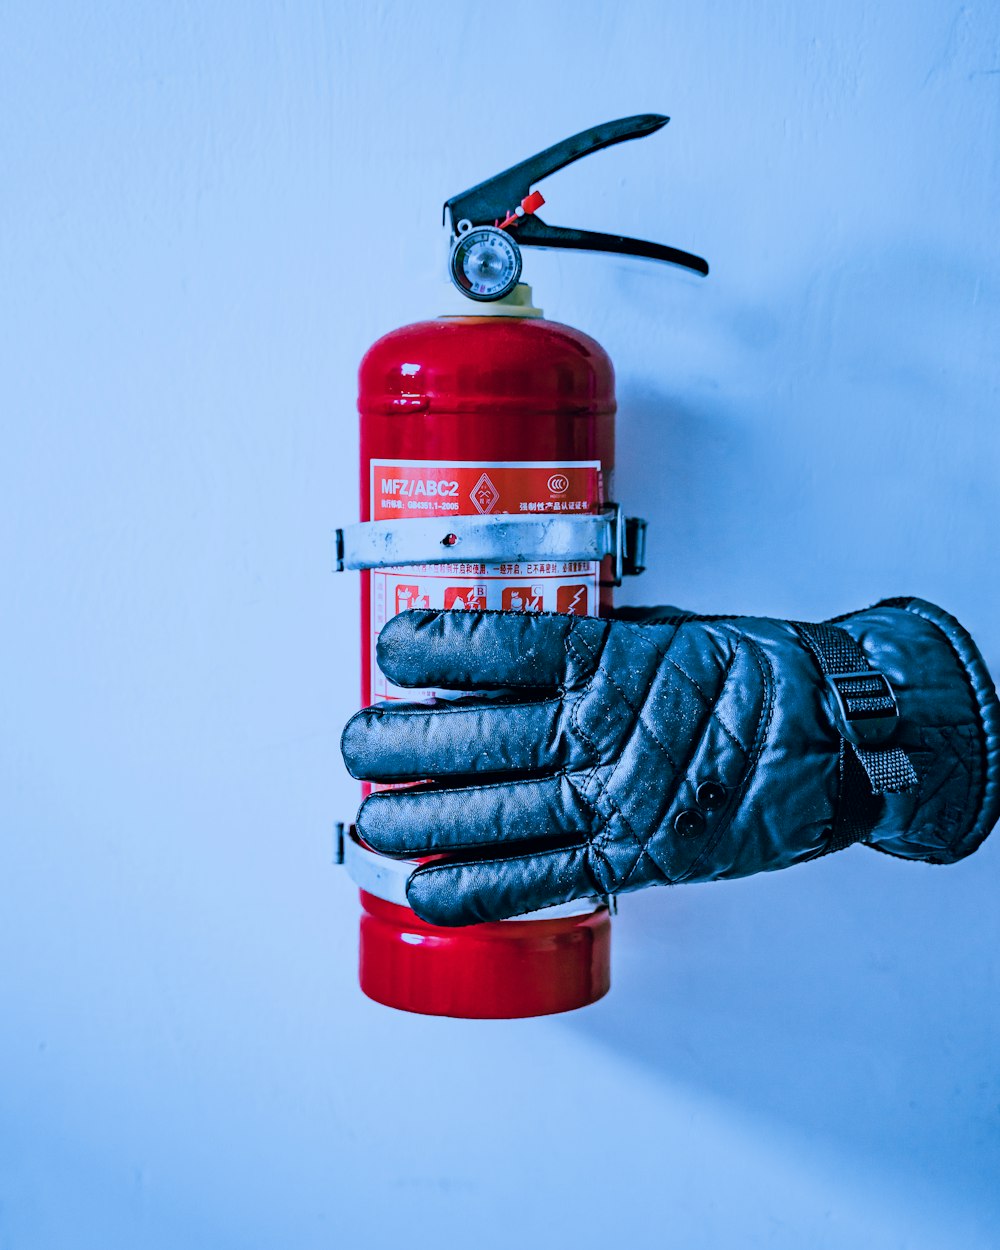 quilted blue gloves near red fire extinguisher